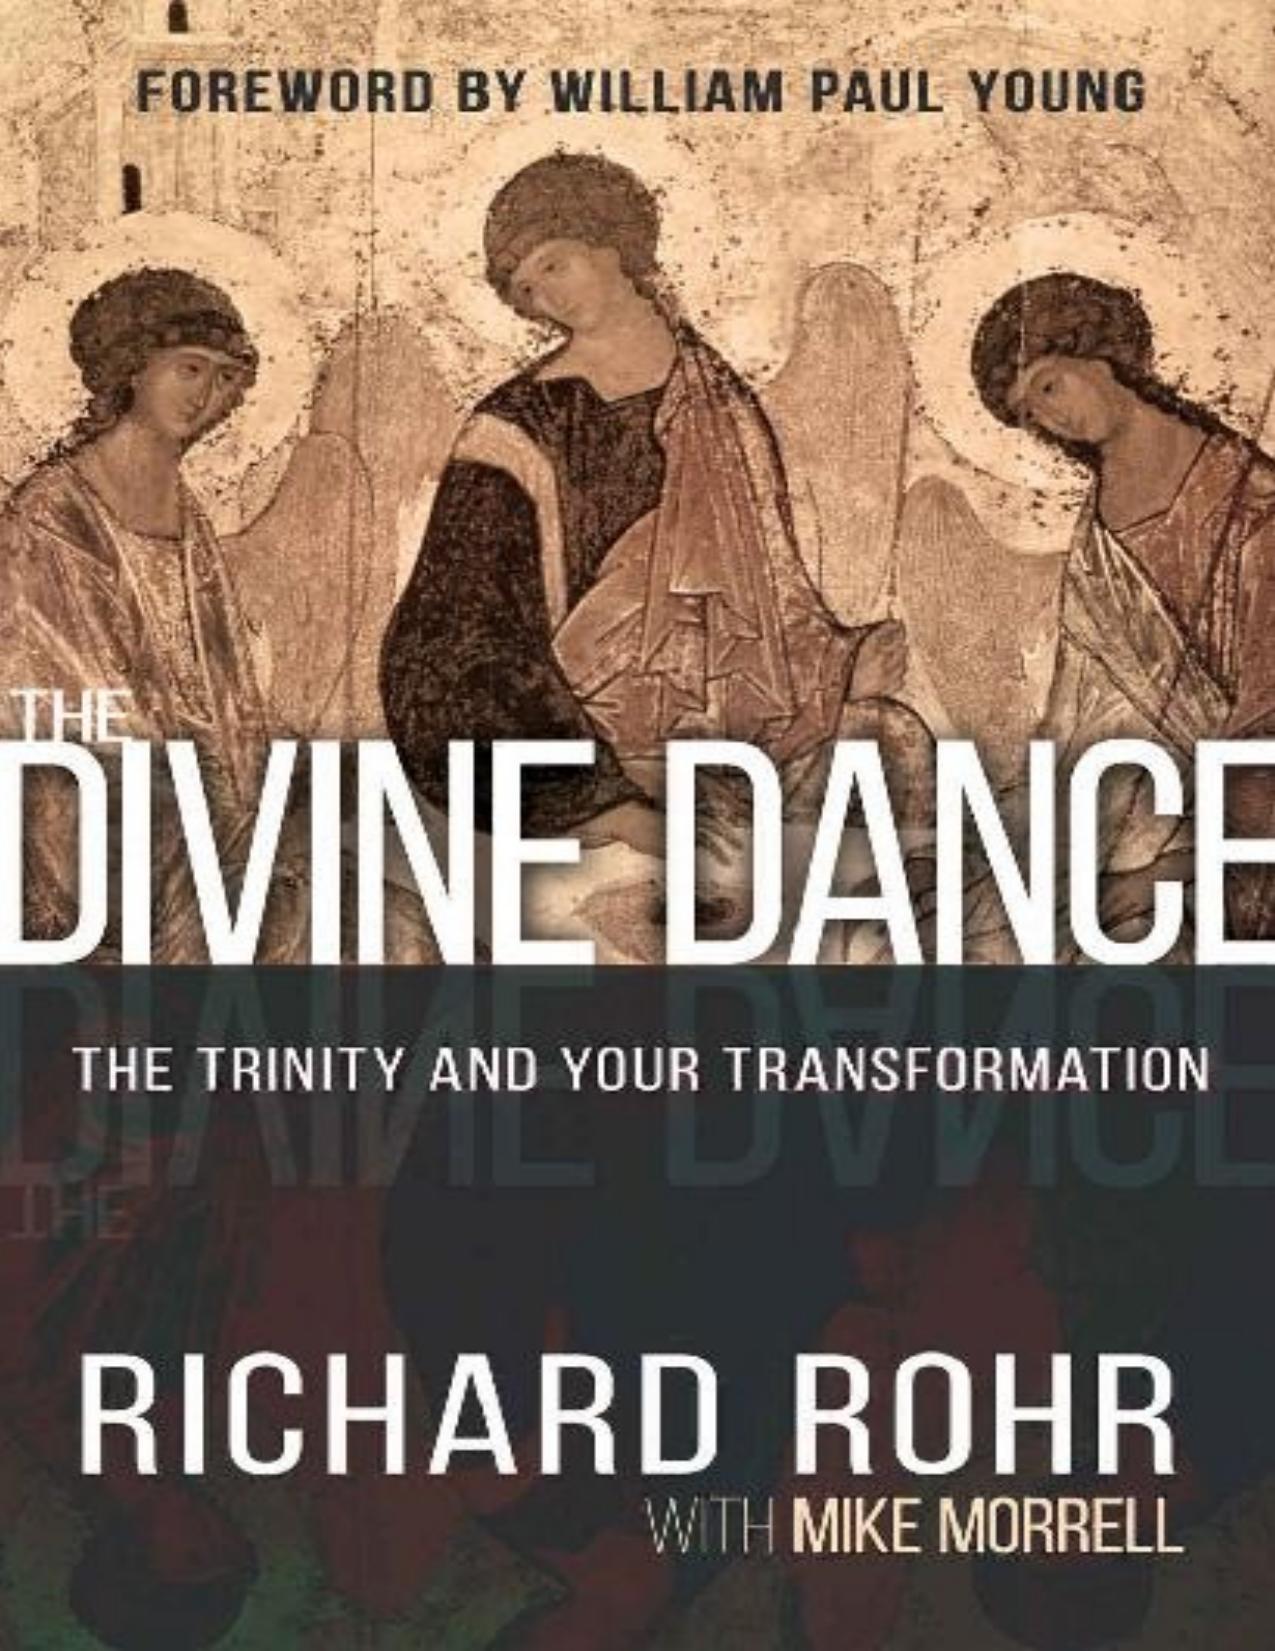 Divine Dance: The Trinity and Your Transformation - PDFDrive.com